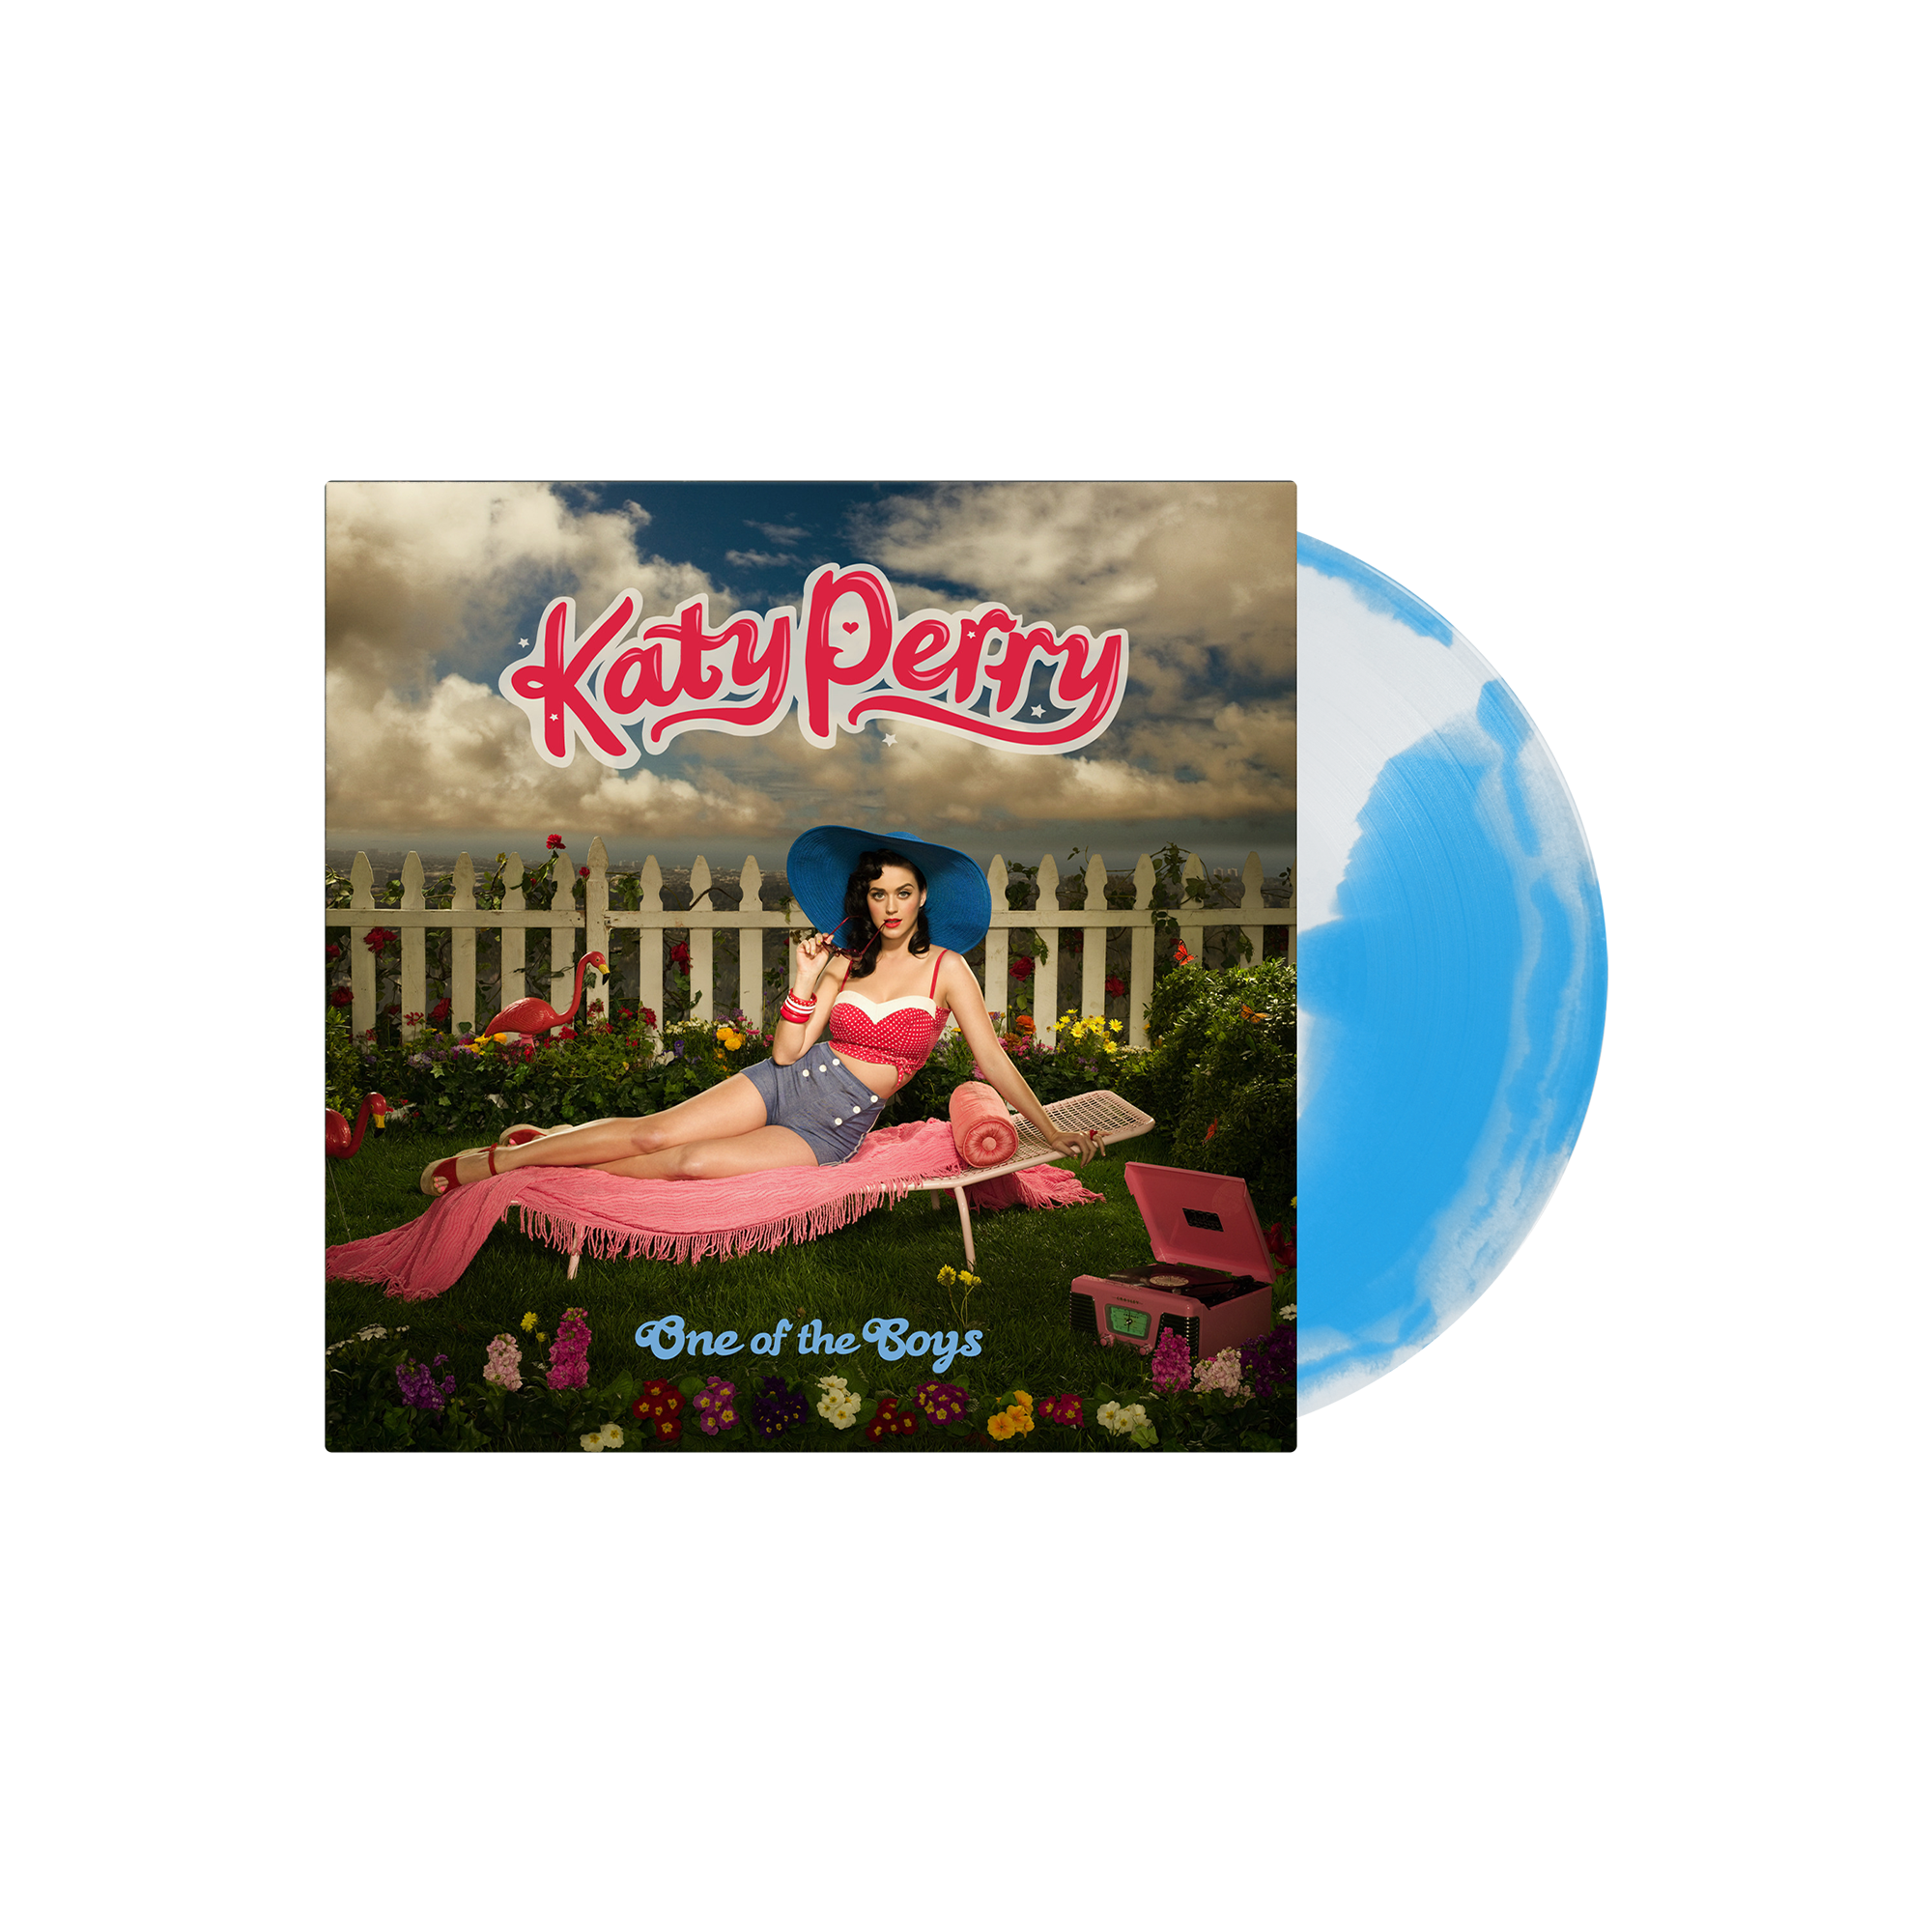 Katy Perry - One of The Boys (15th Anniversary Edition): Exclusive Cloudy Blue Vinyl LP + Bonus 7" Single